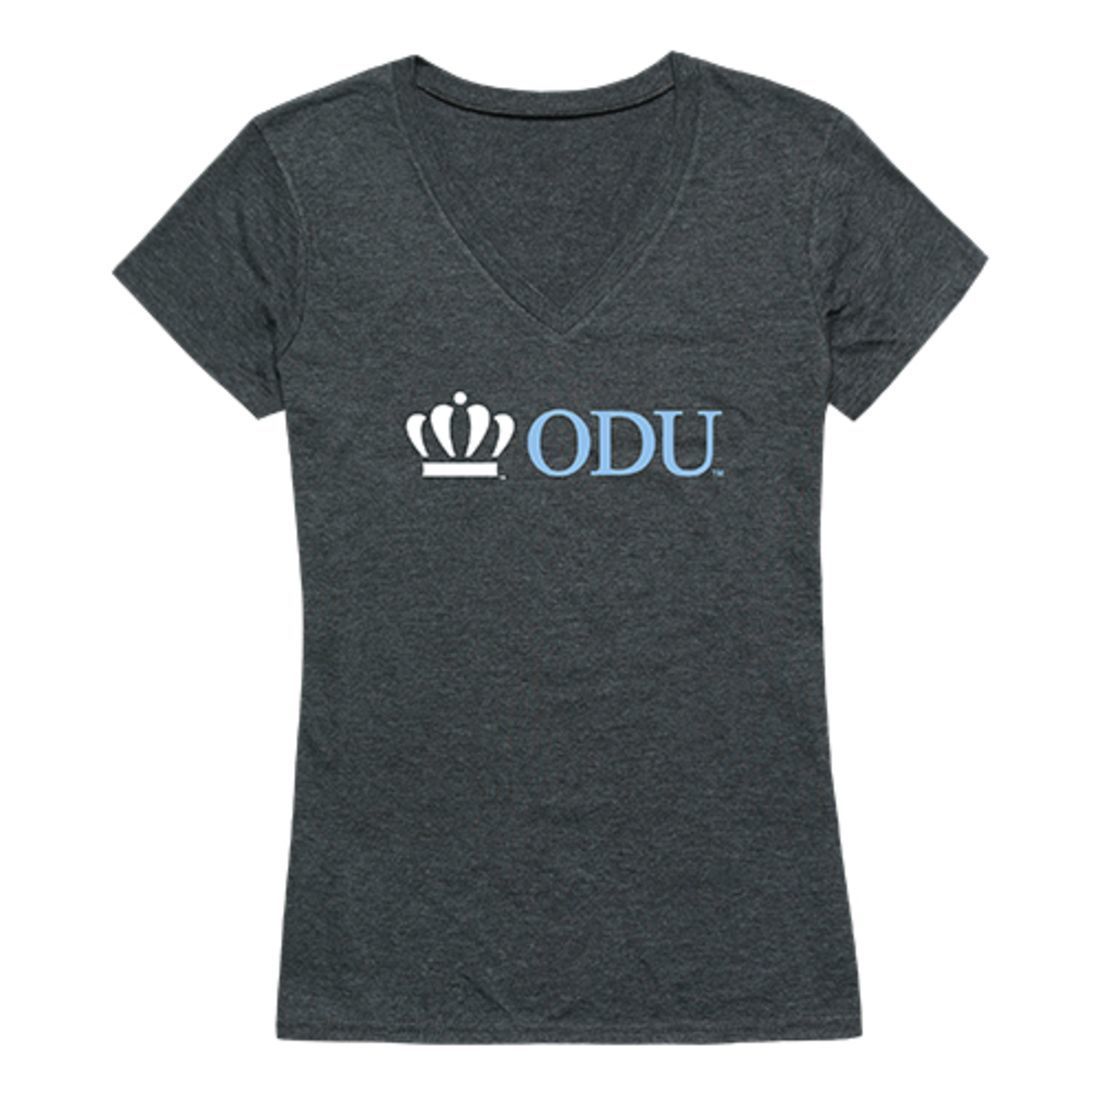 ODU Old Dominion University Monarchs Womens Institutional Tee T-Shirt Heather Charcoal-Campus-Wardrobe